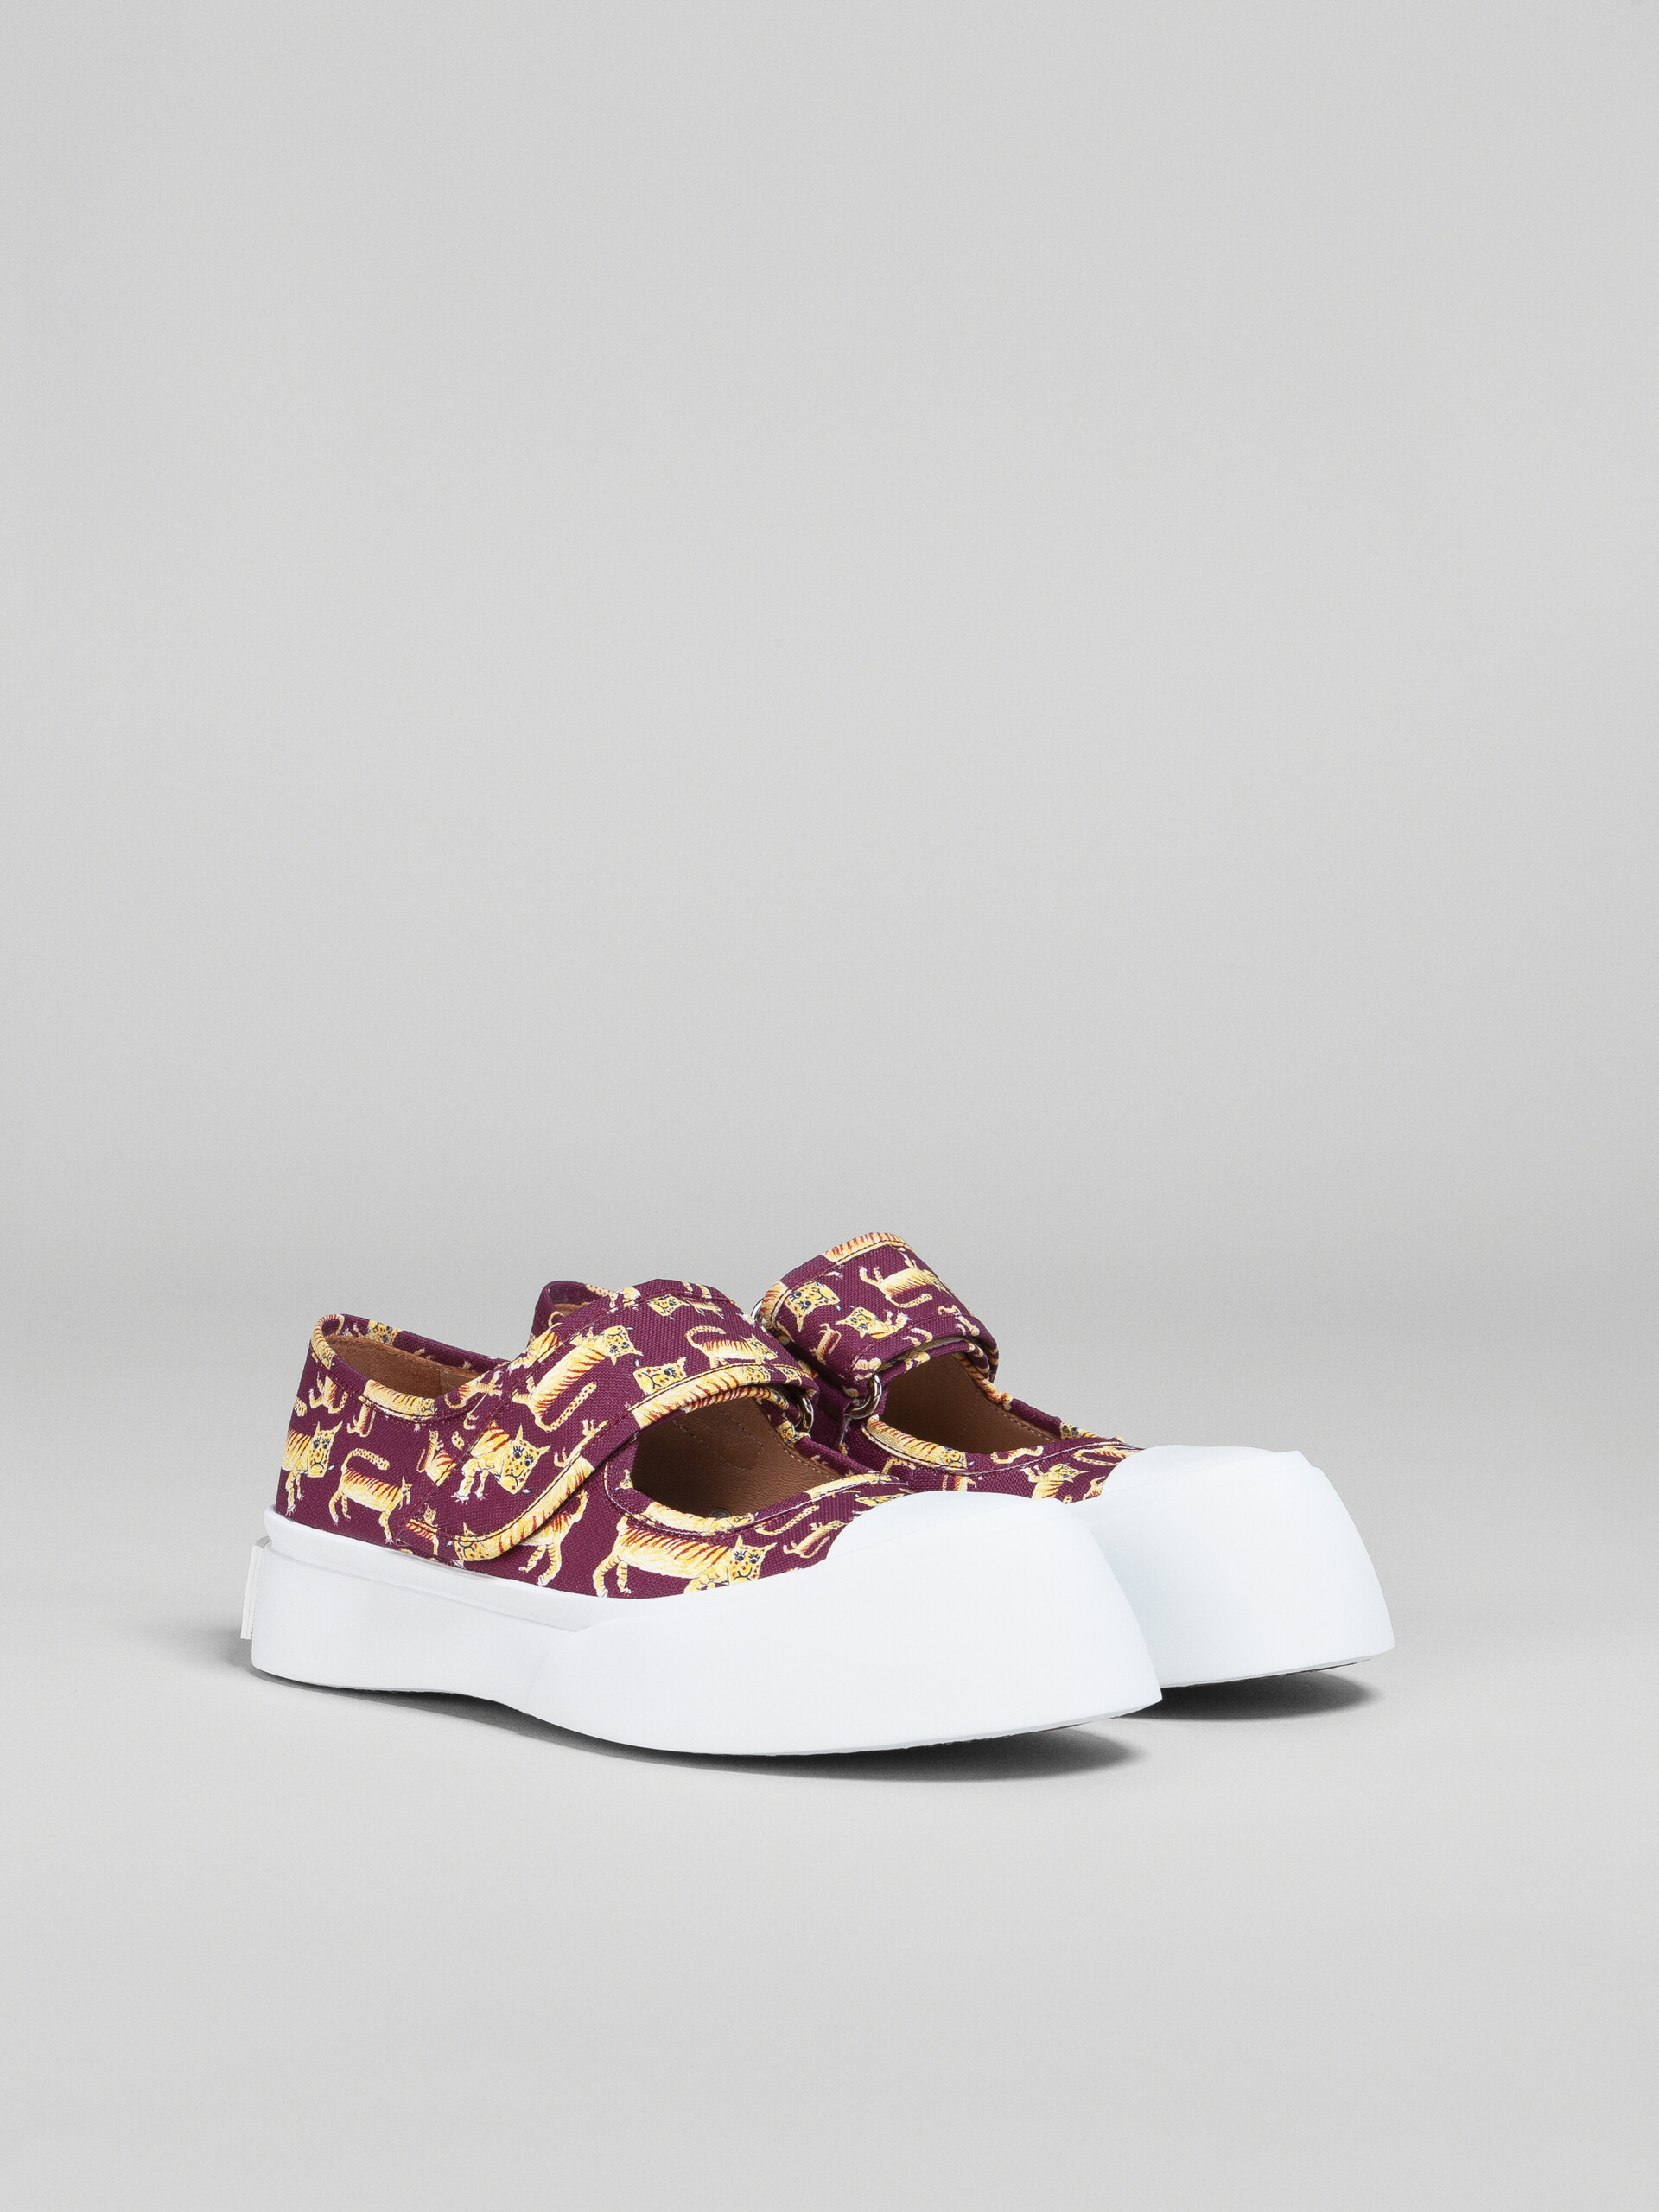 Tiger print canvas PABLO Mary-Jane sneaker - Sneakers - Image 2